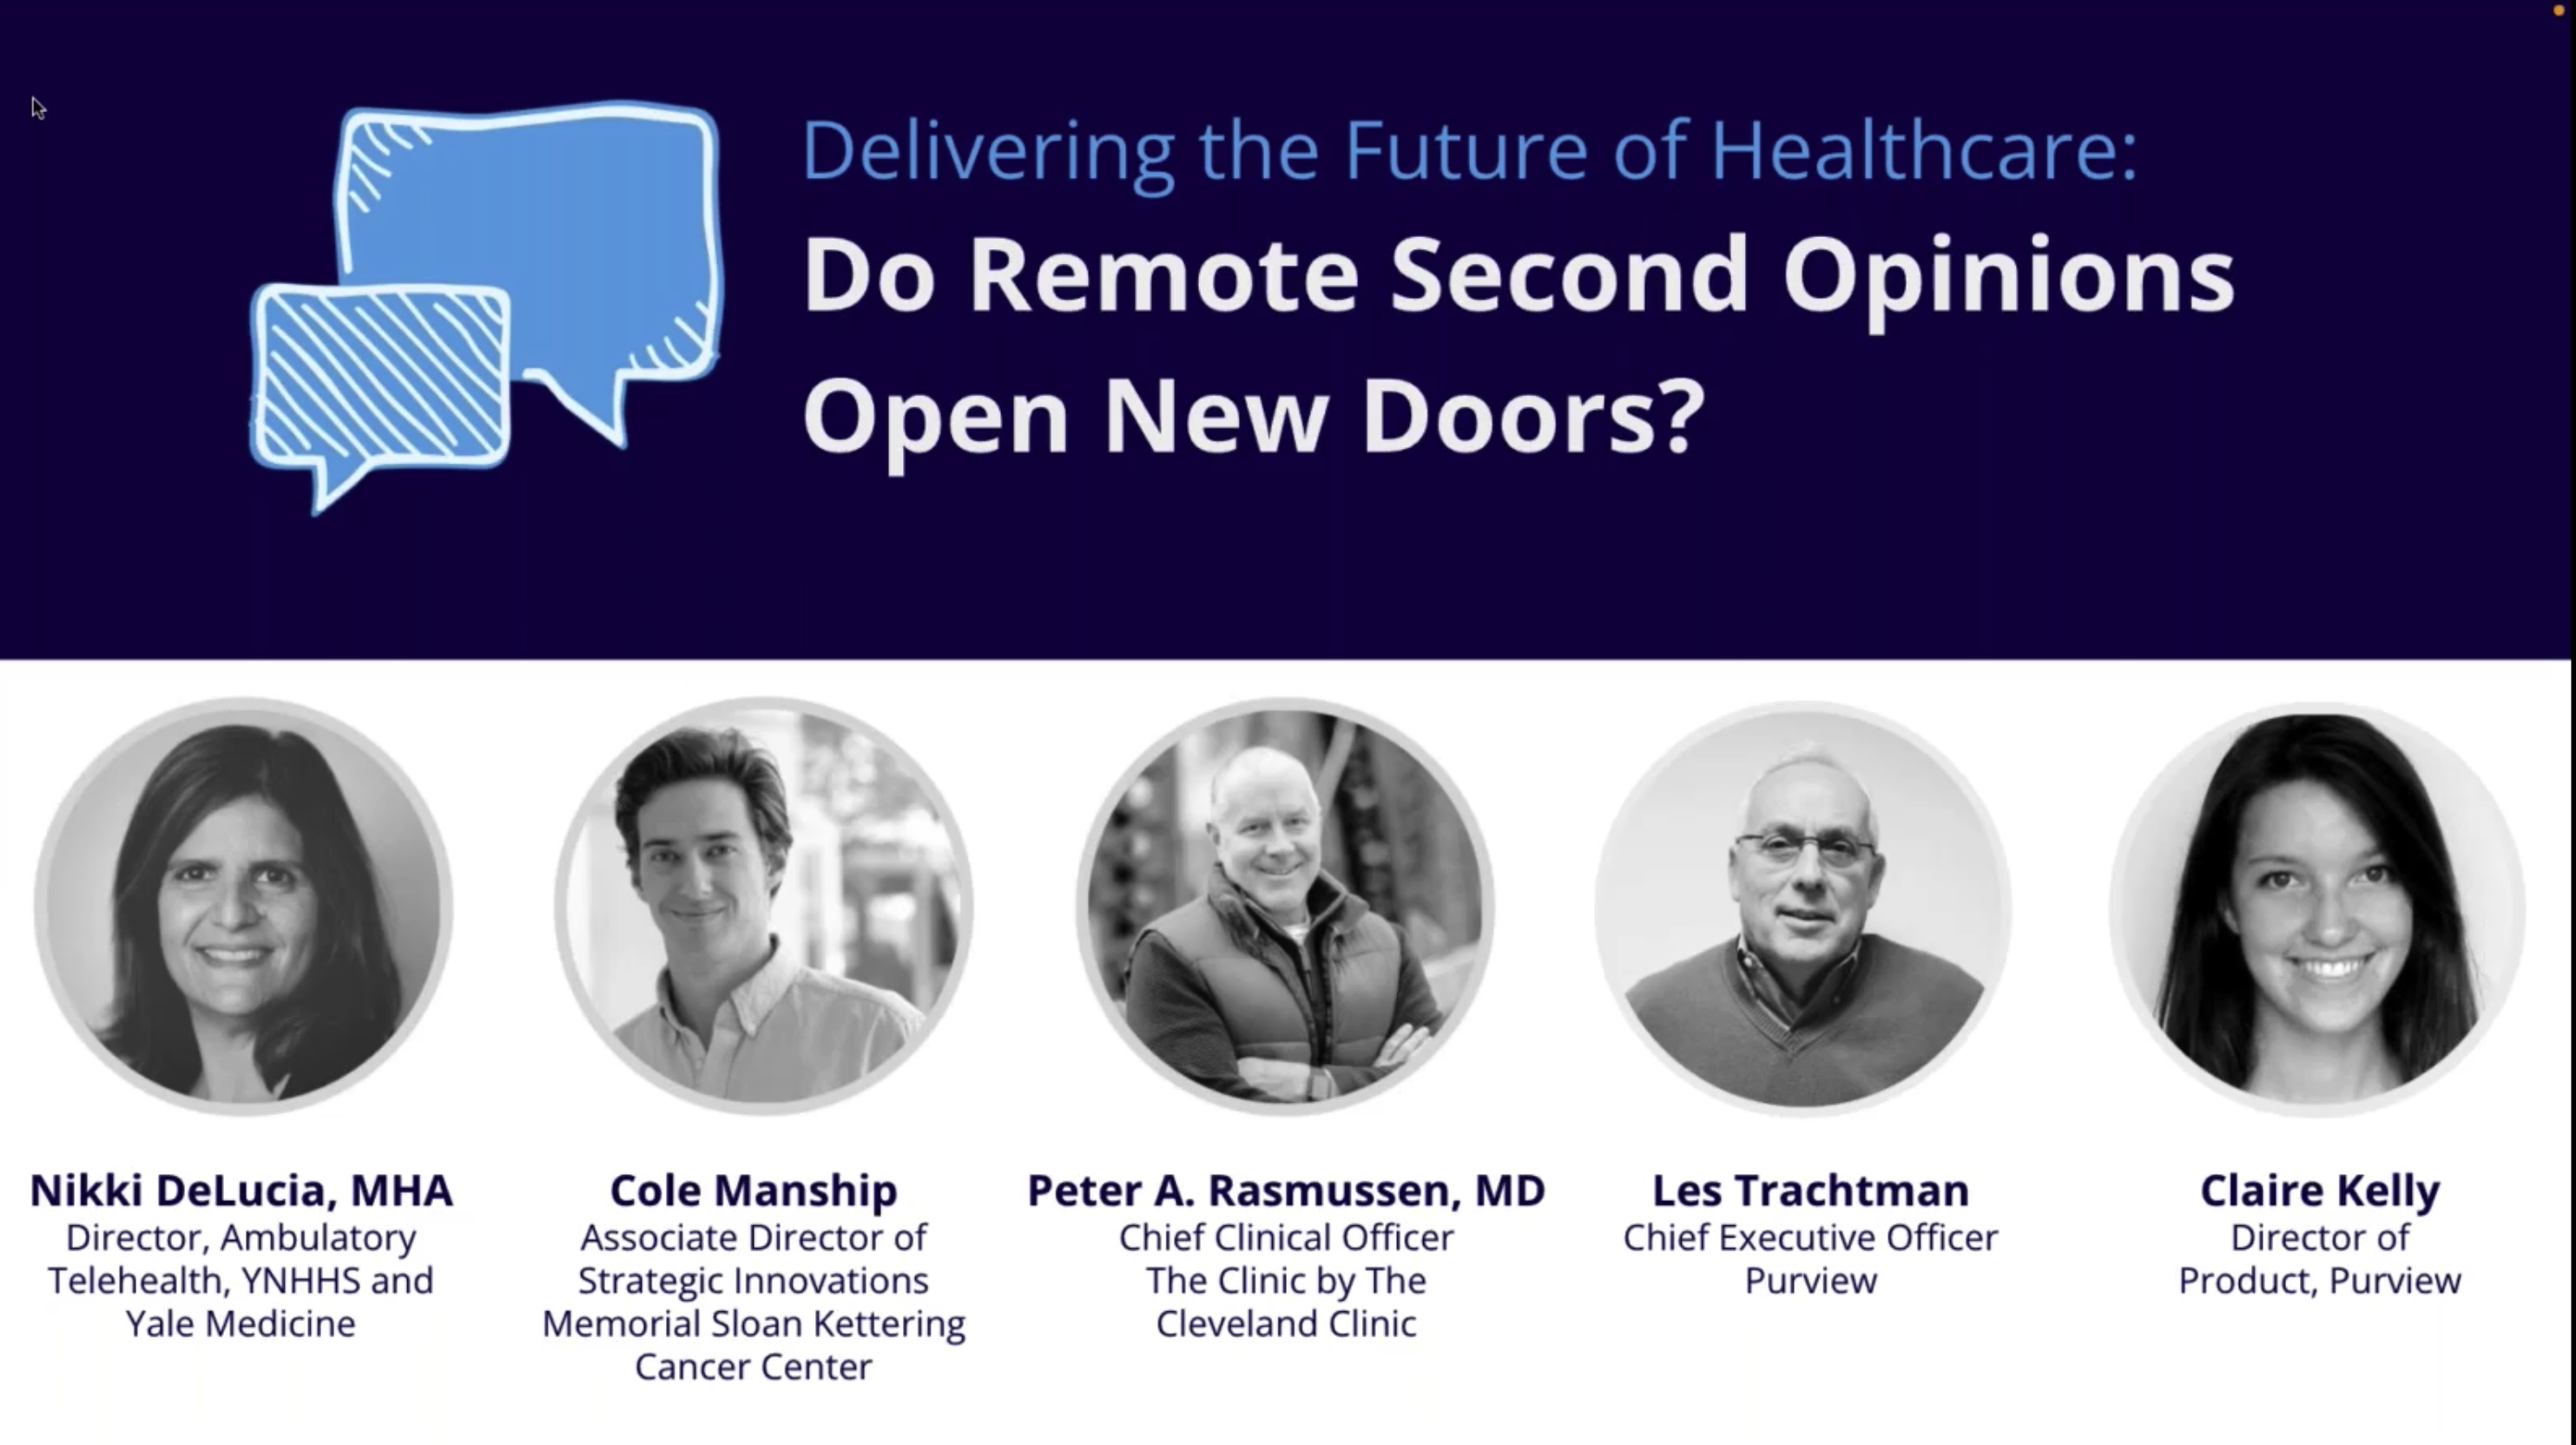 Do Remote Second Opinions Open Doors?